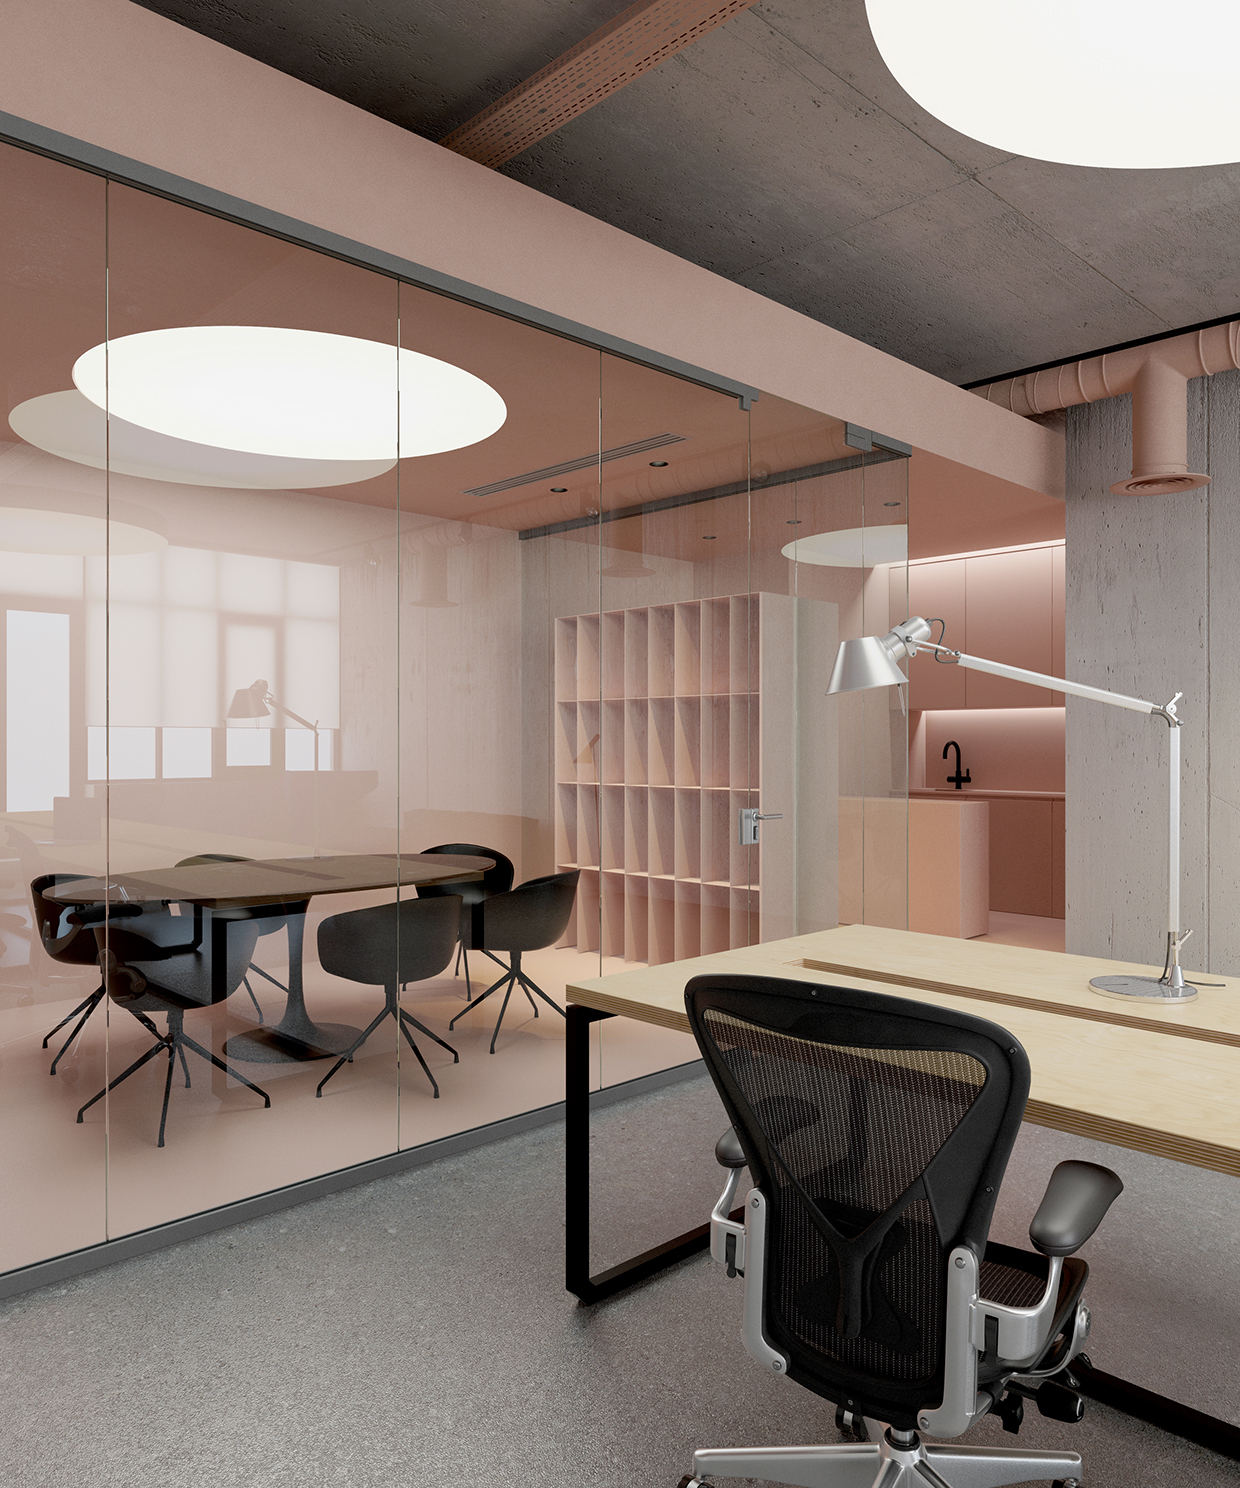 Commercial Office & Workspace Design – Board & Vellum